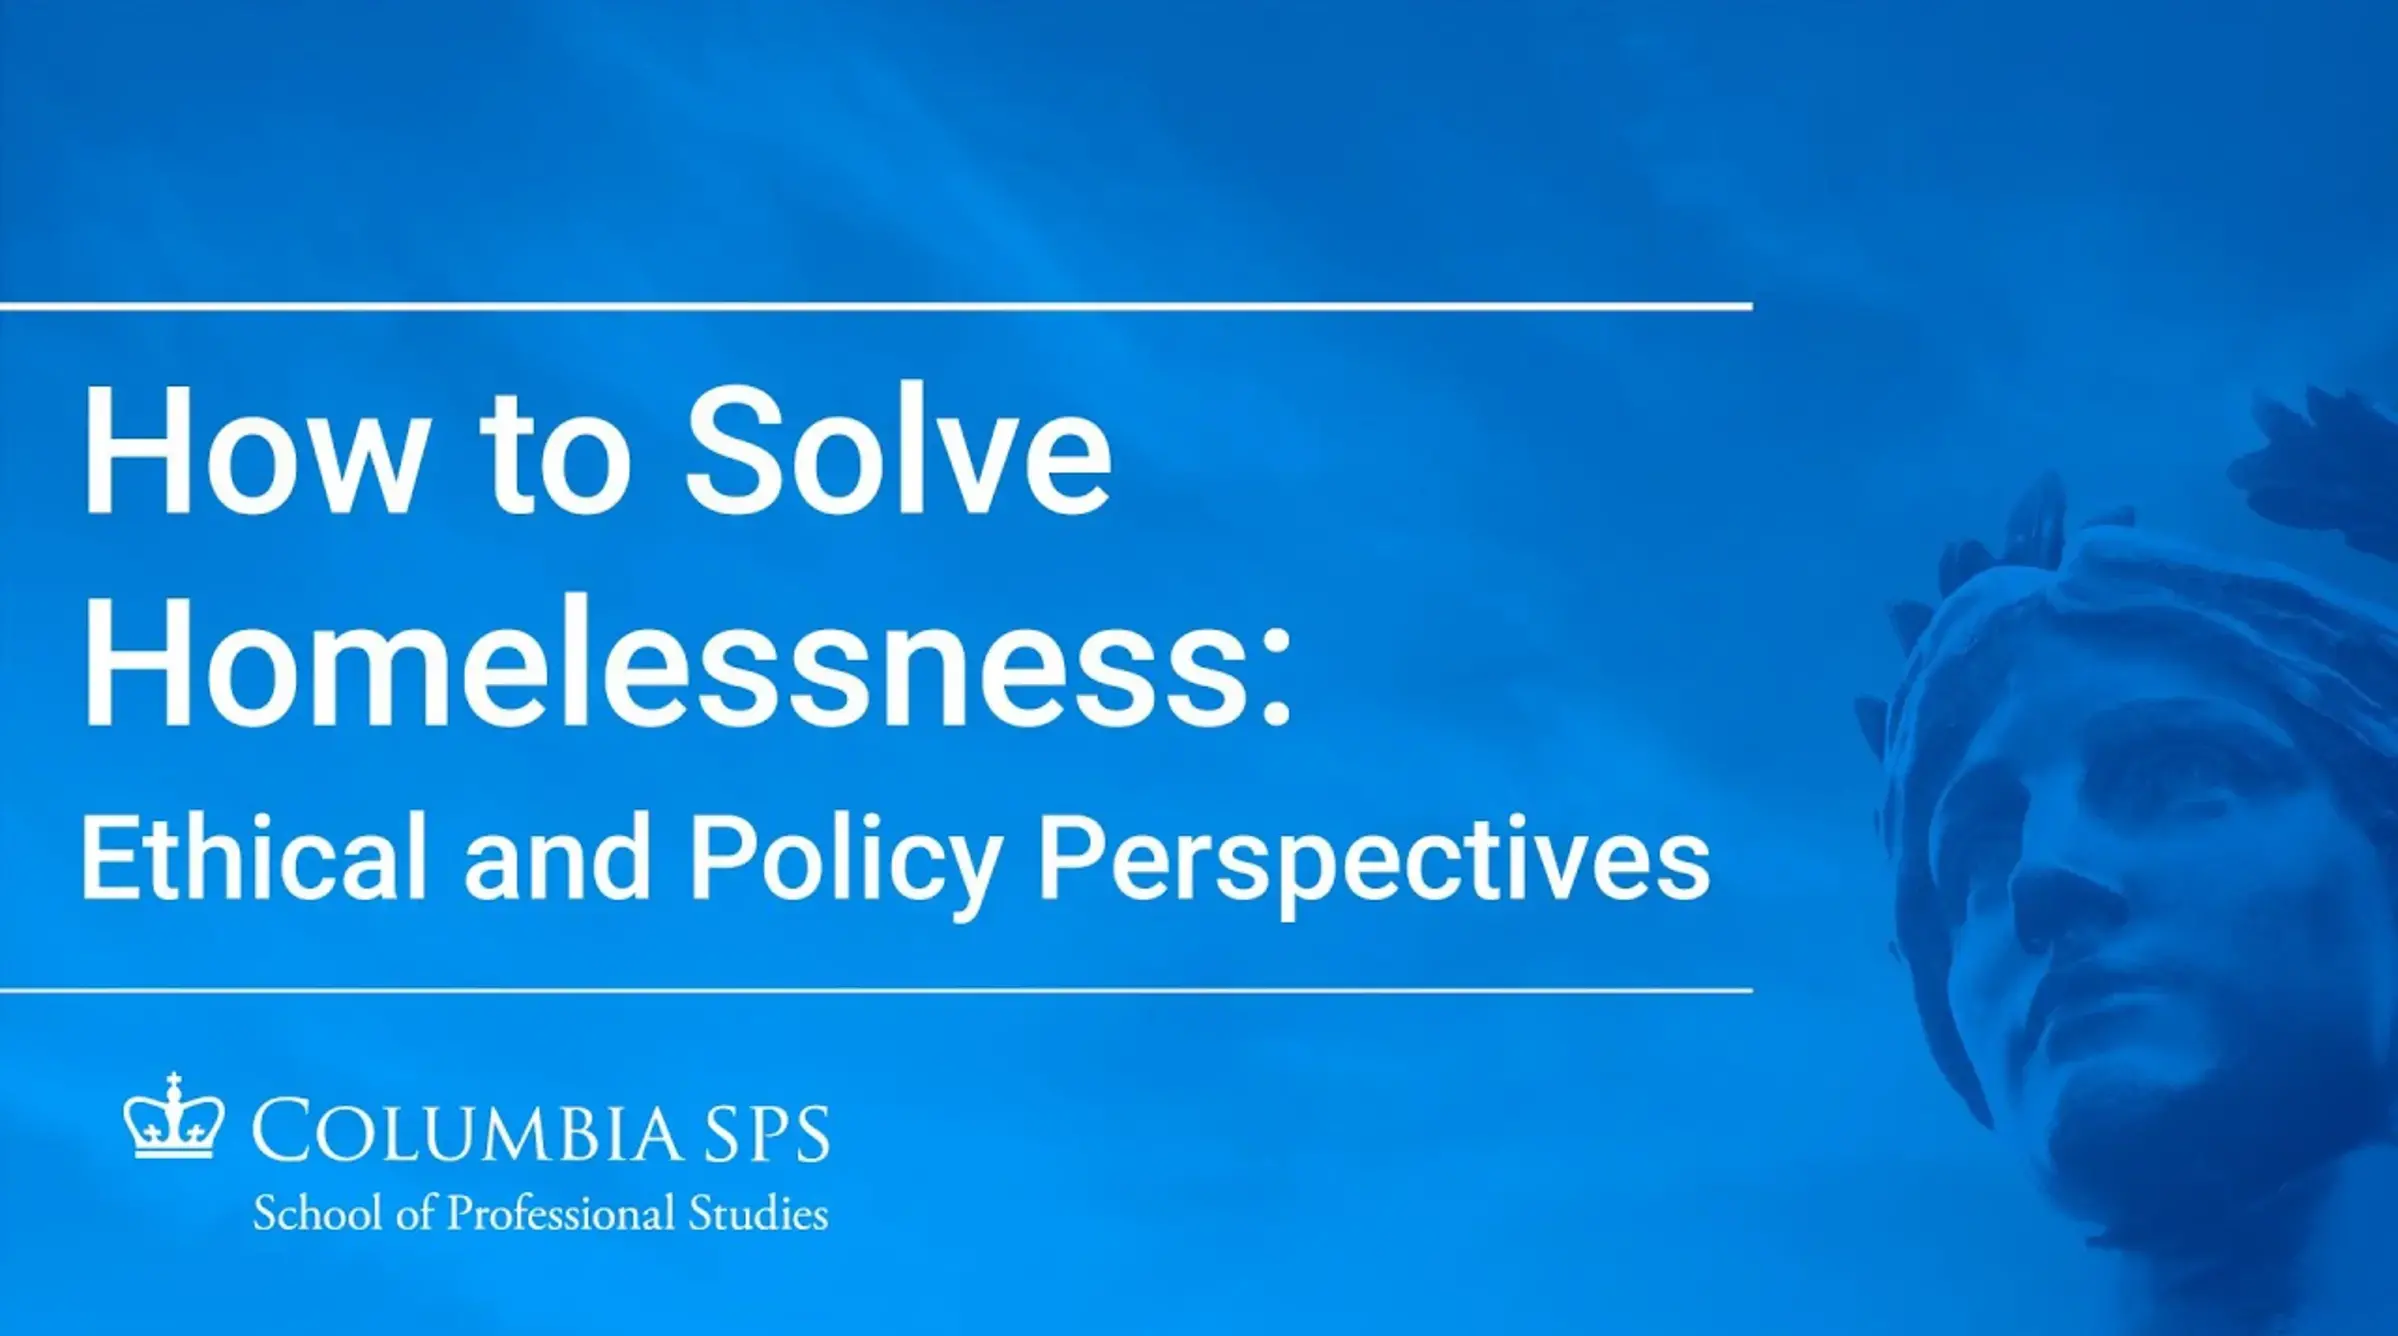 How to Solve Homelessness: Ethical and Policy Perspectives